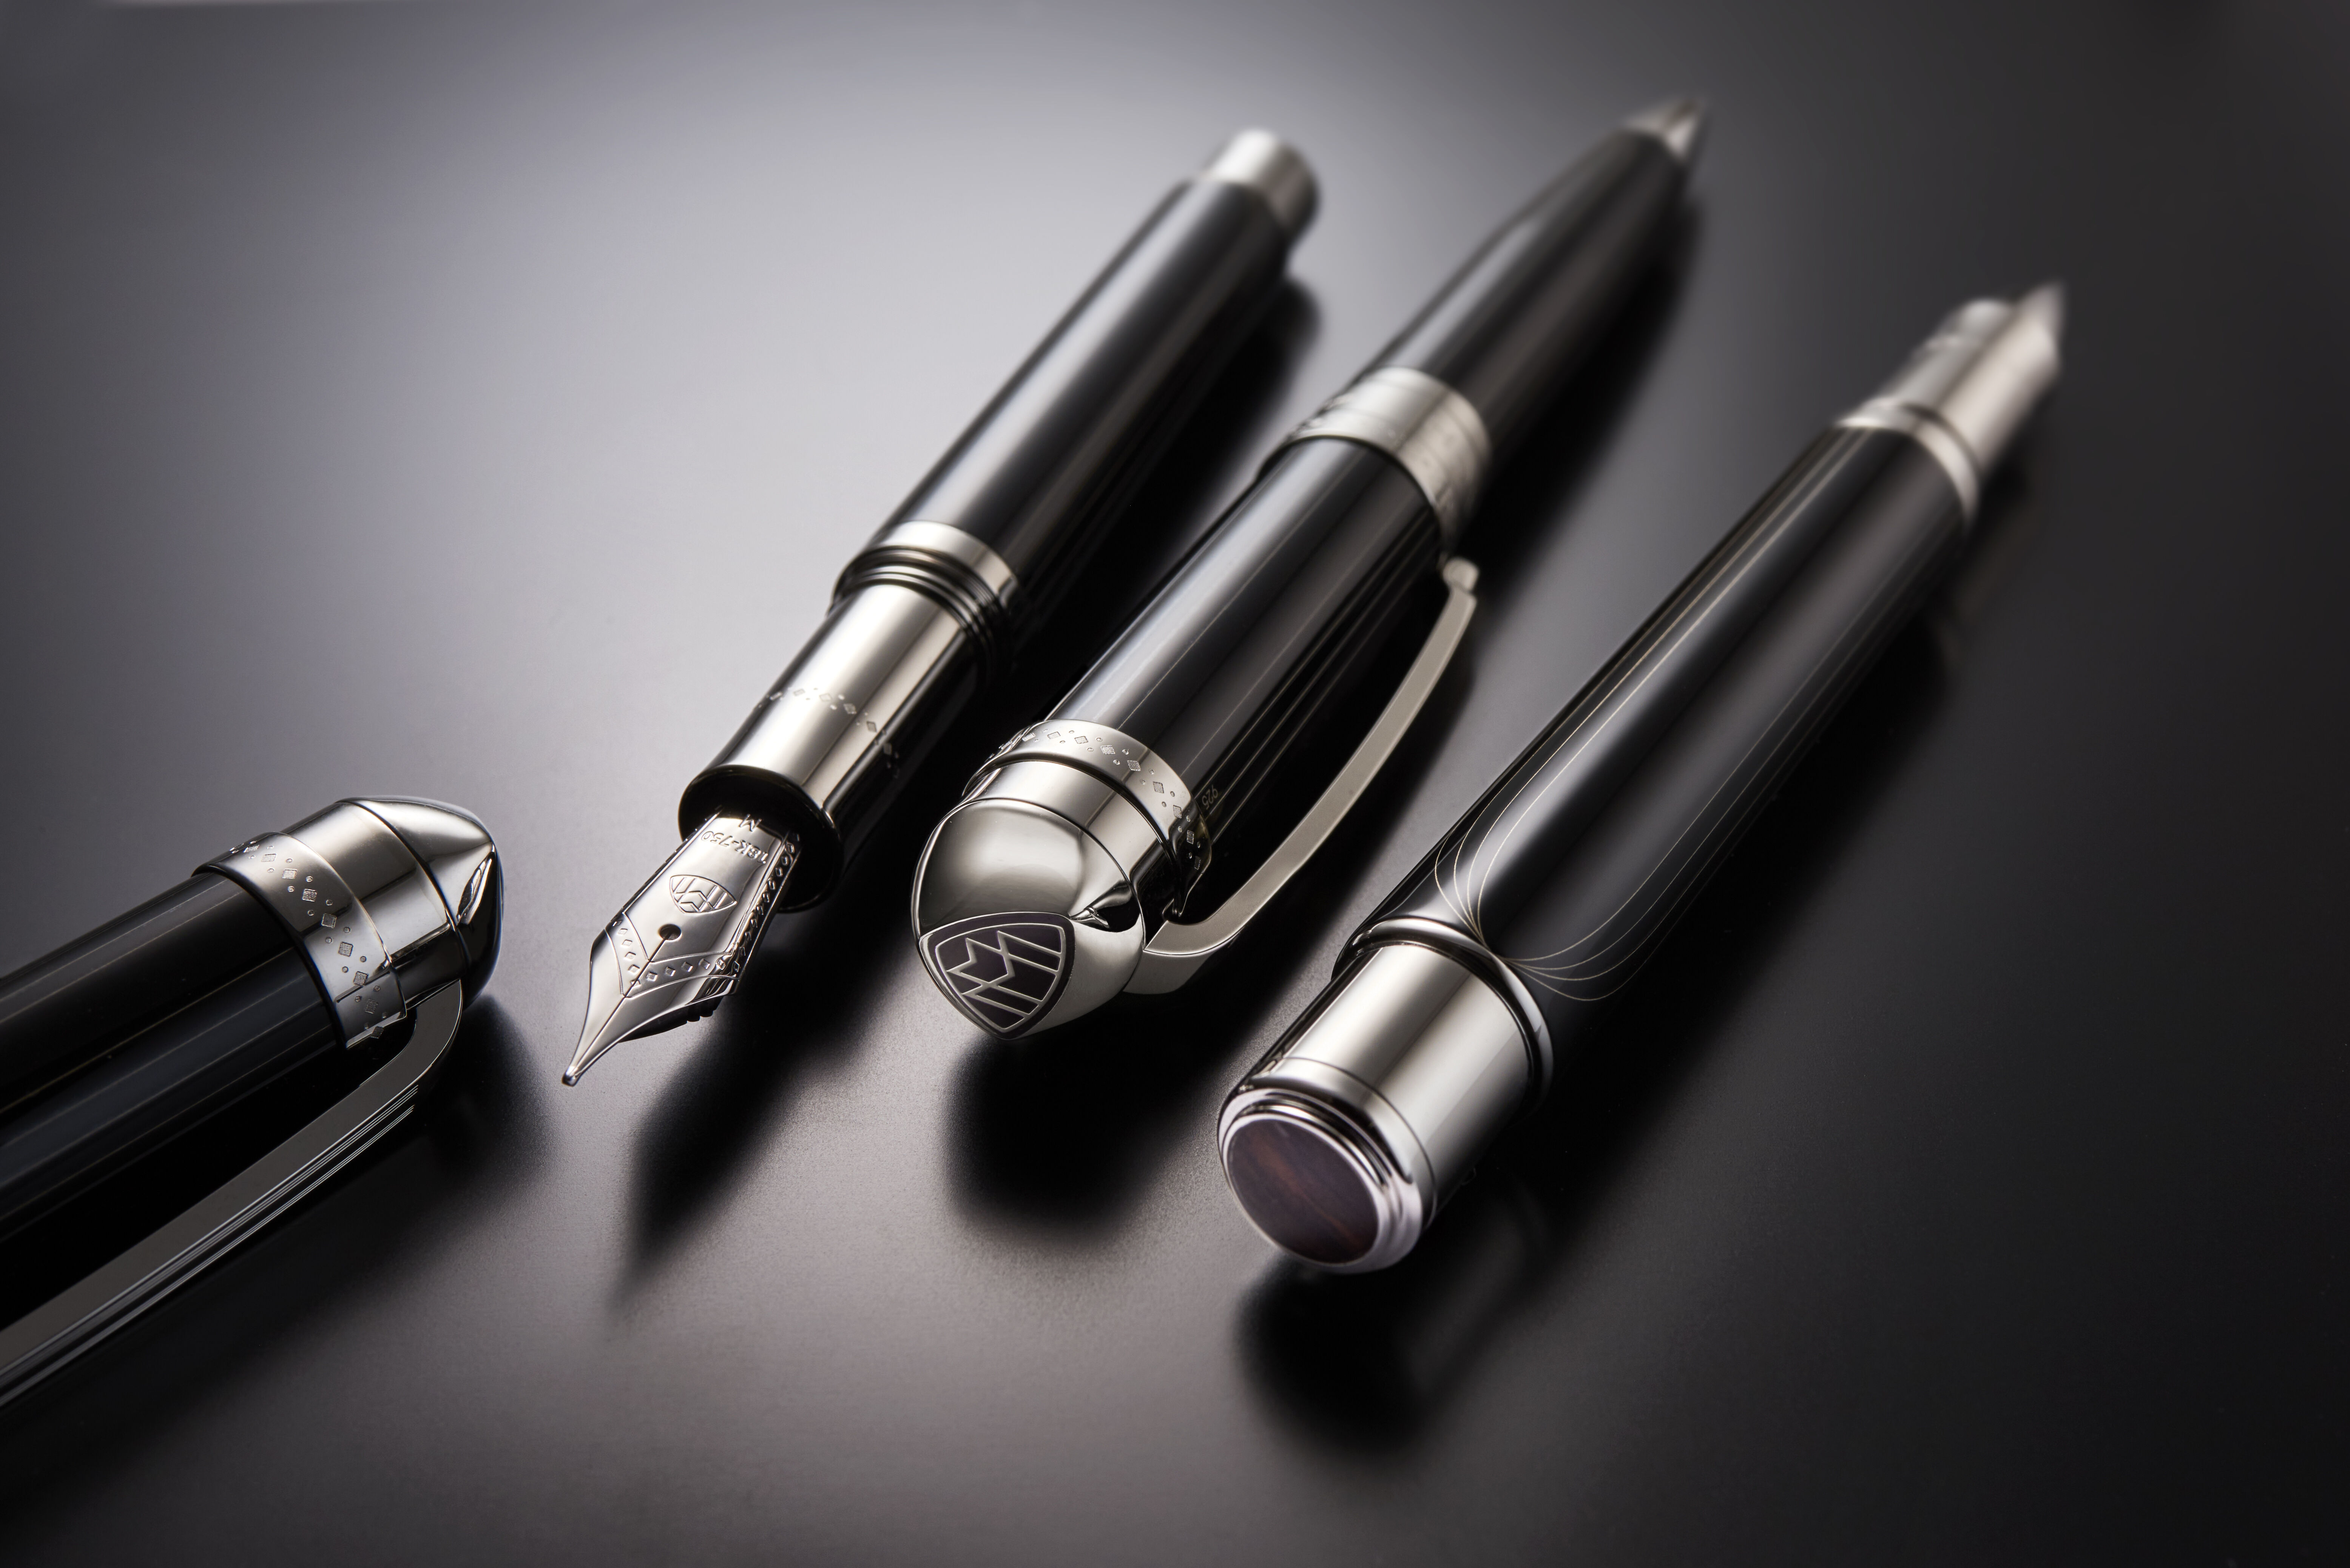 MAYBACH Fountain pen with 100 diamonds - Limited Edition